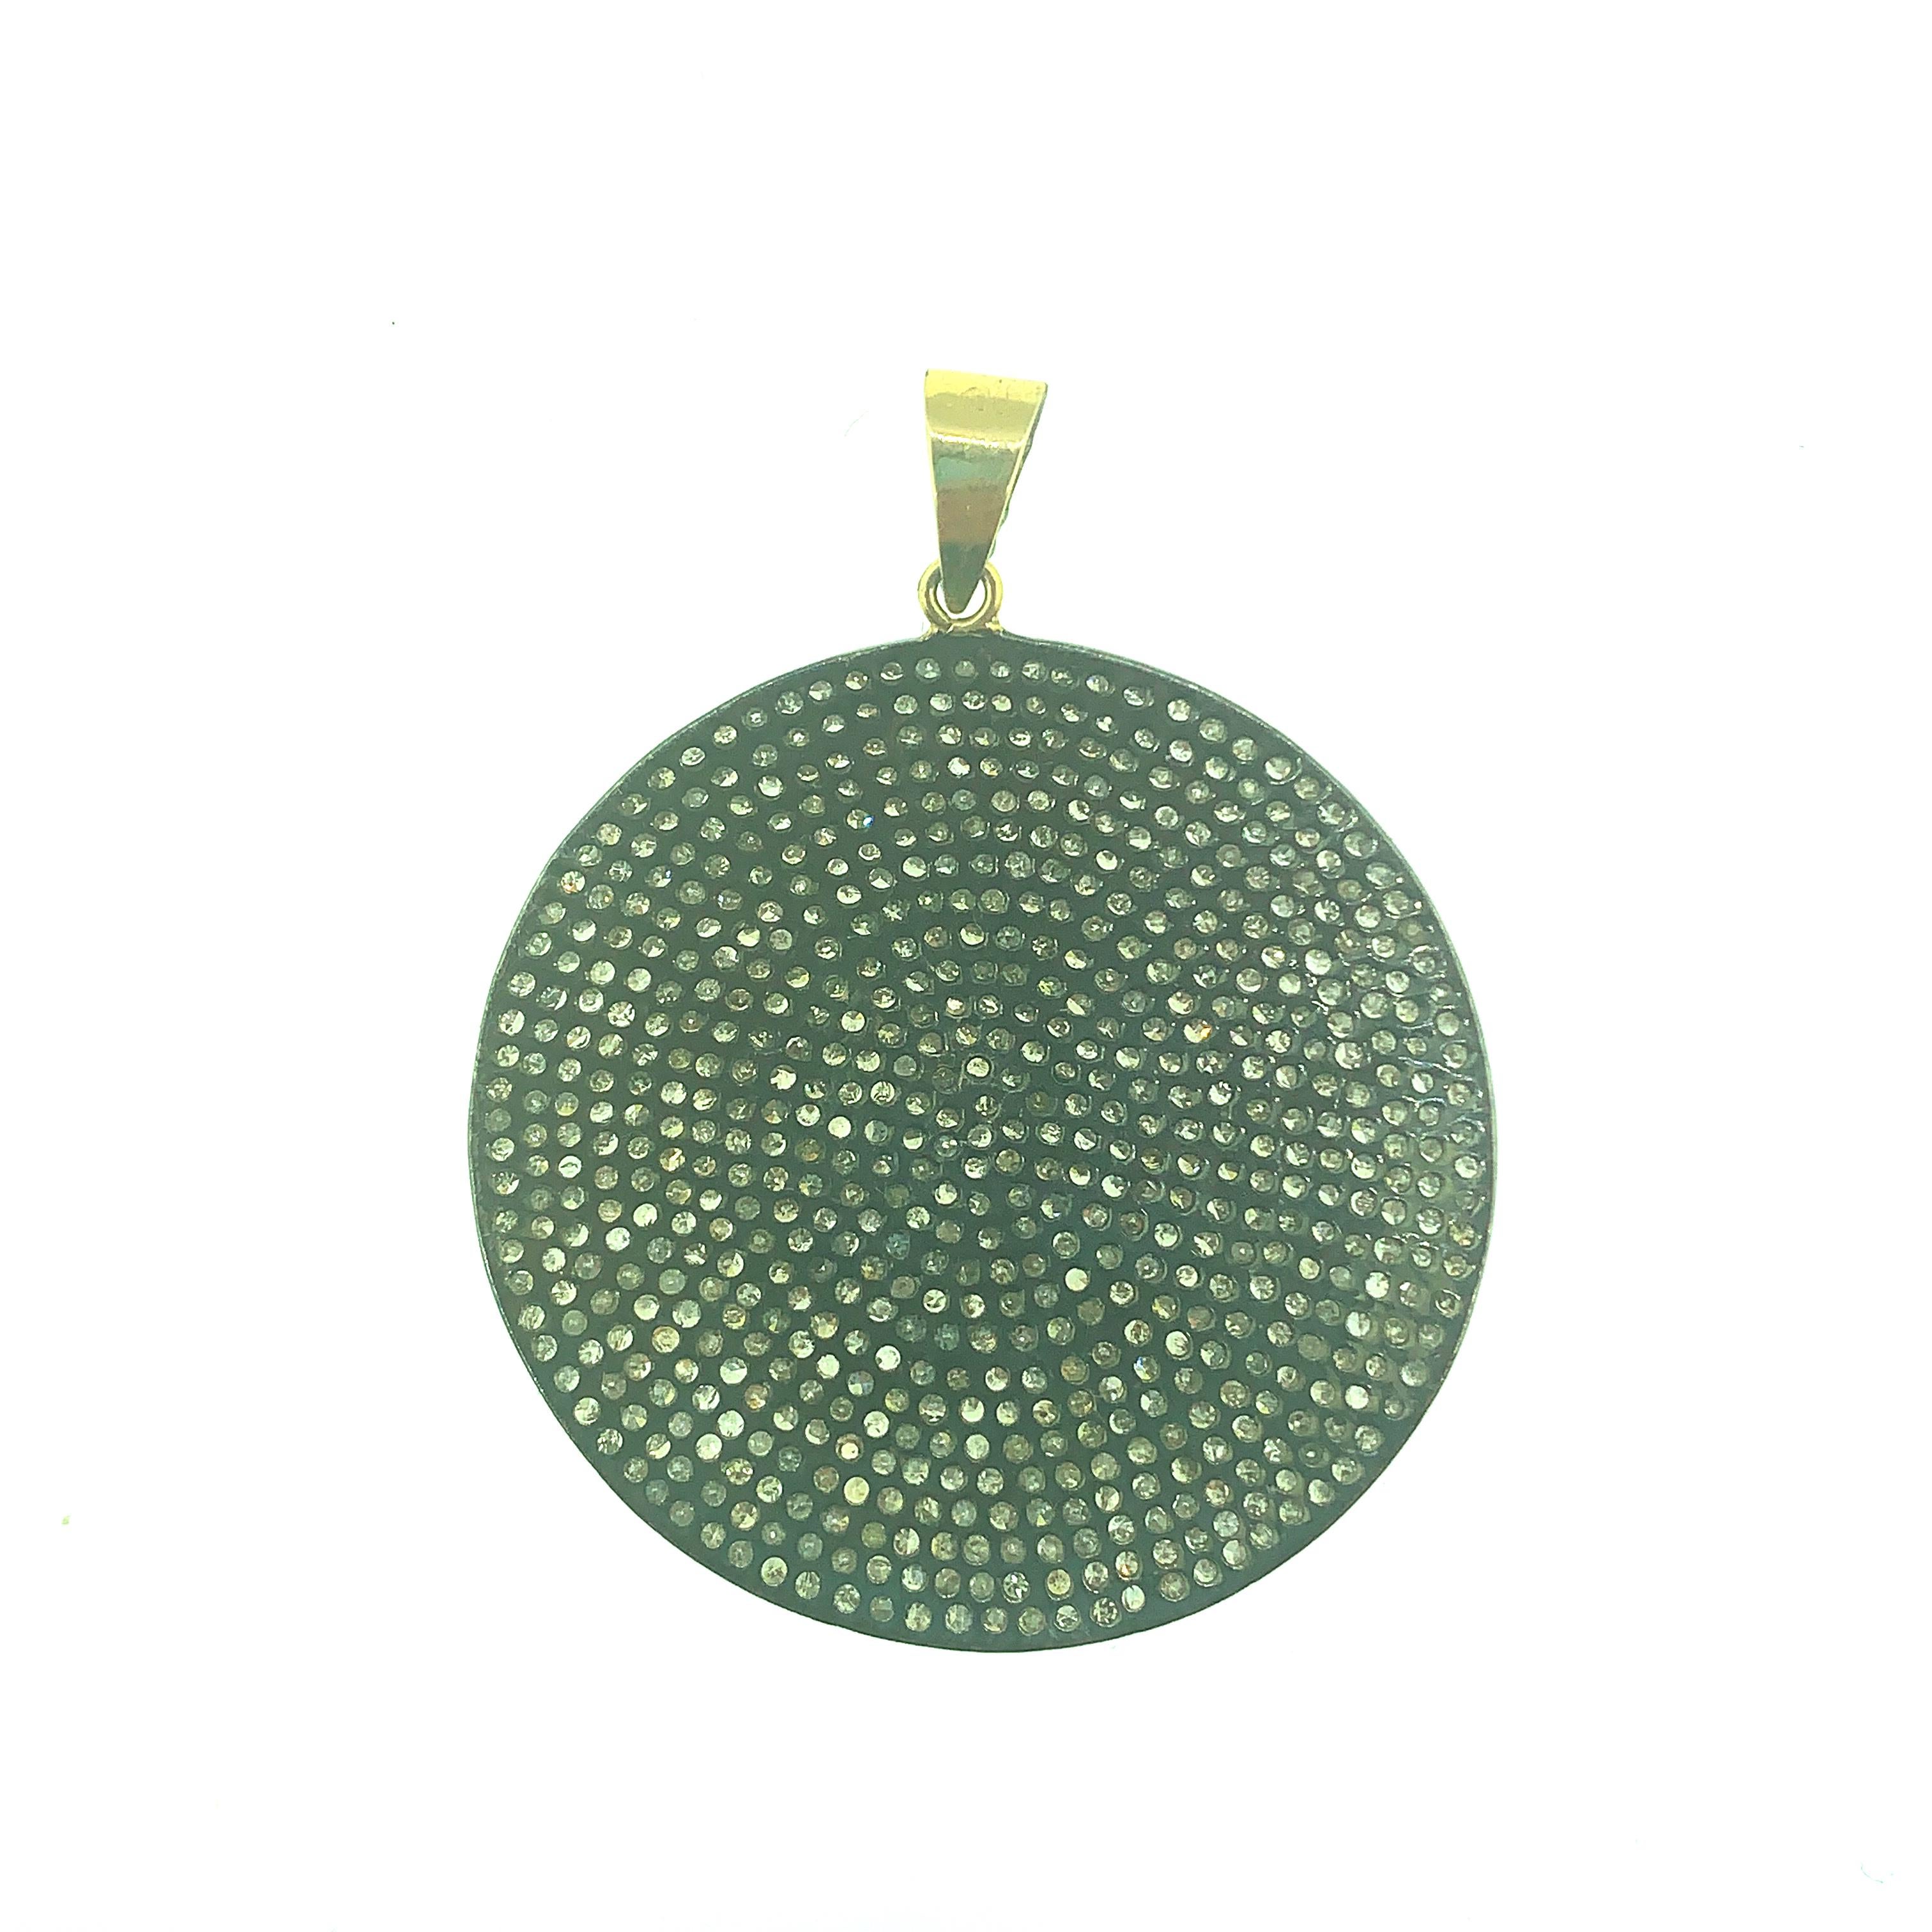 6.15Ct Round Pave Diamond Disc Pendant in Oxidized Sterling Silver, 14Kt Gold In New Condition For Sale In New York, NY